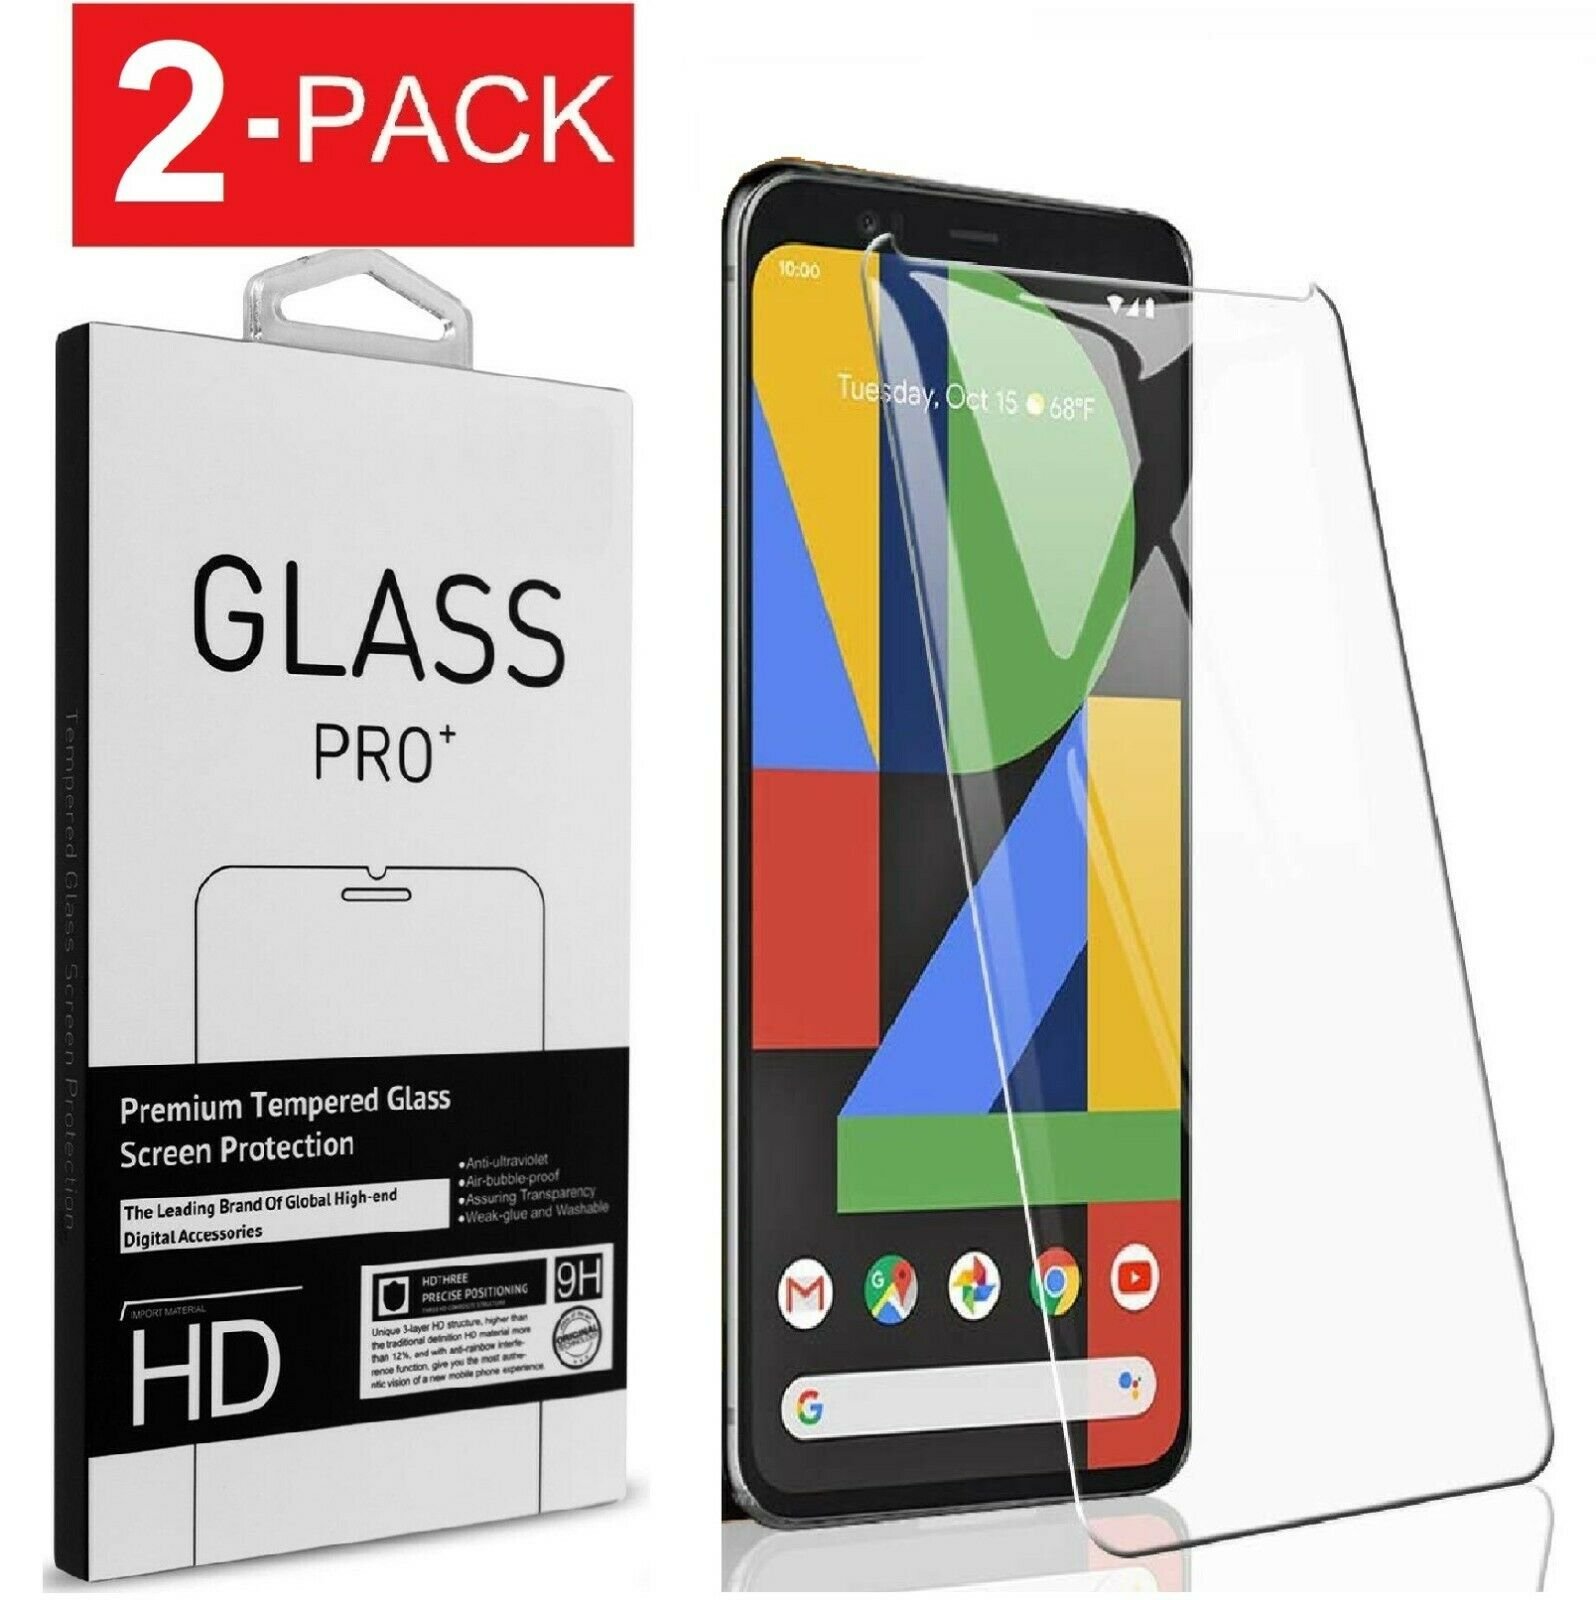 Easy to Install Compatible with Google Pixel 3a Screen Protector 2 Pack No Bubbles Tempered Glass Screen Protector Anti Fingerprint Screen Protector for Google Pixel 3a Case-Friendly 